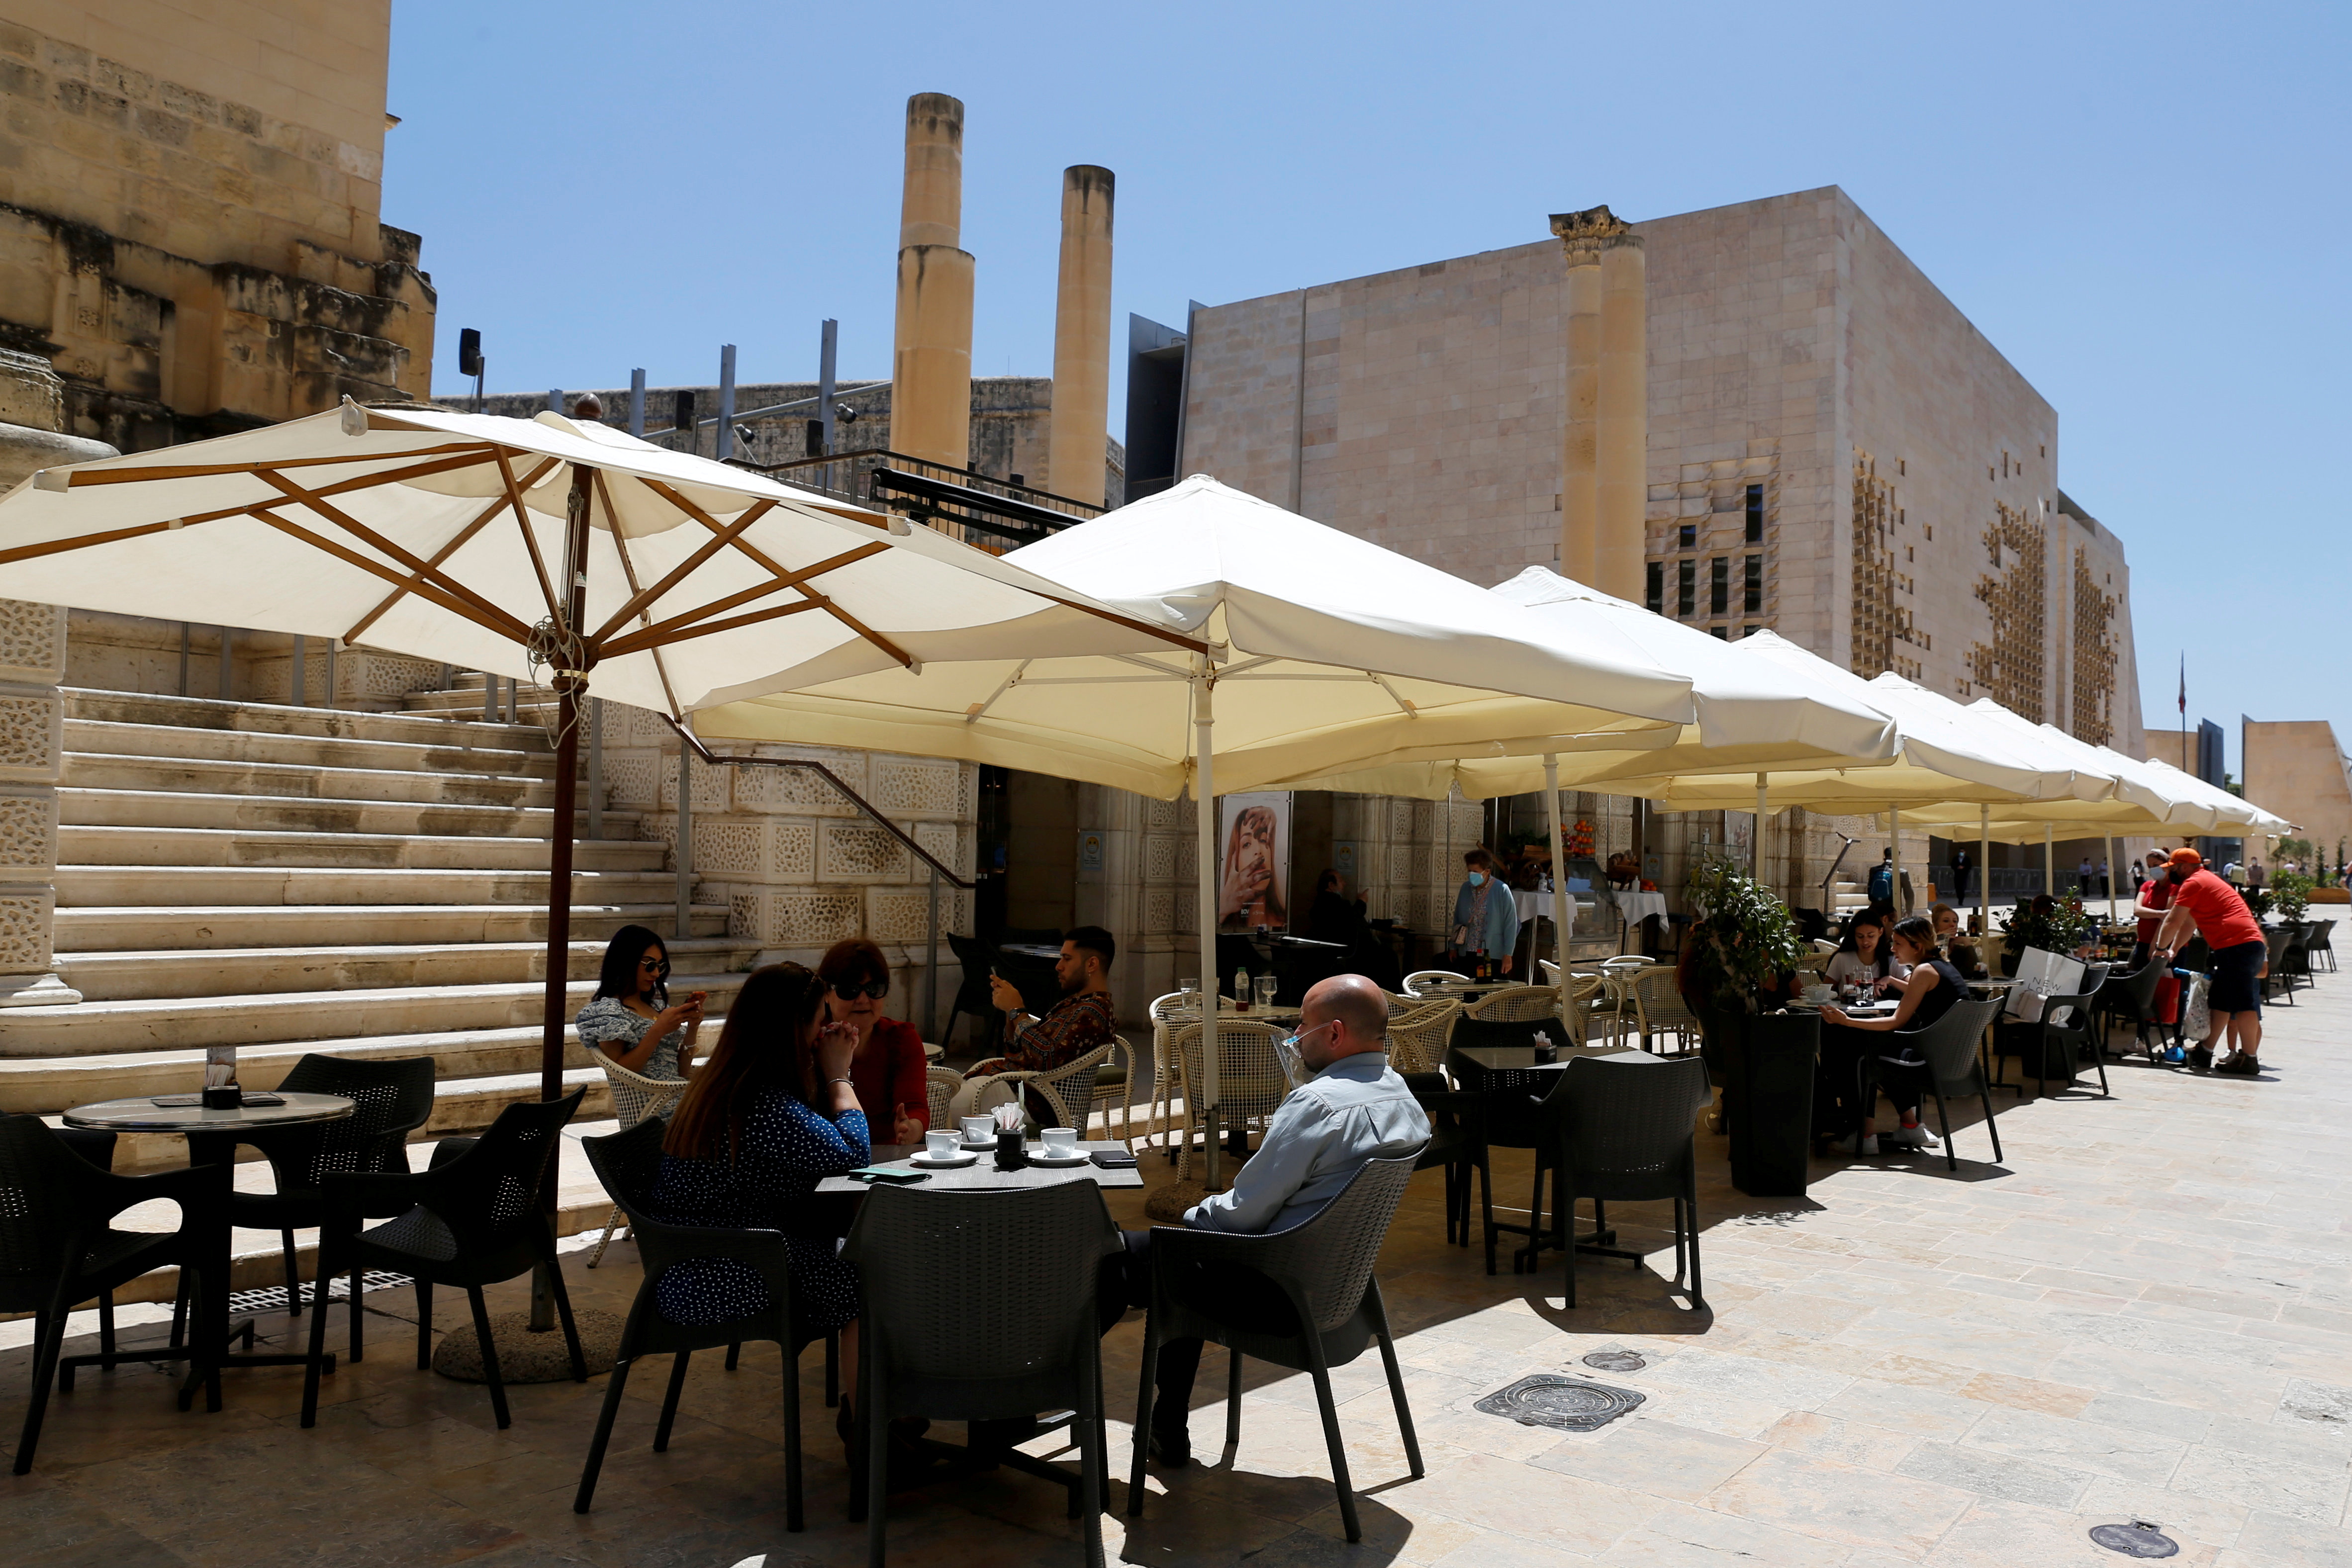 Restaurants and markets reopen after COVID-19 vaccinations reach 60% of the adult population in Malta